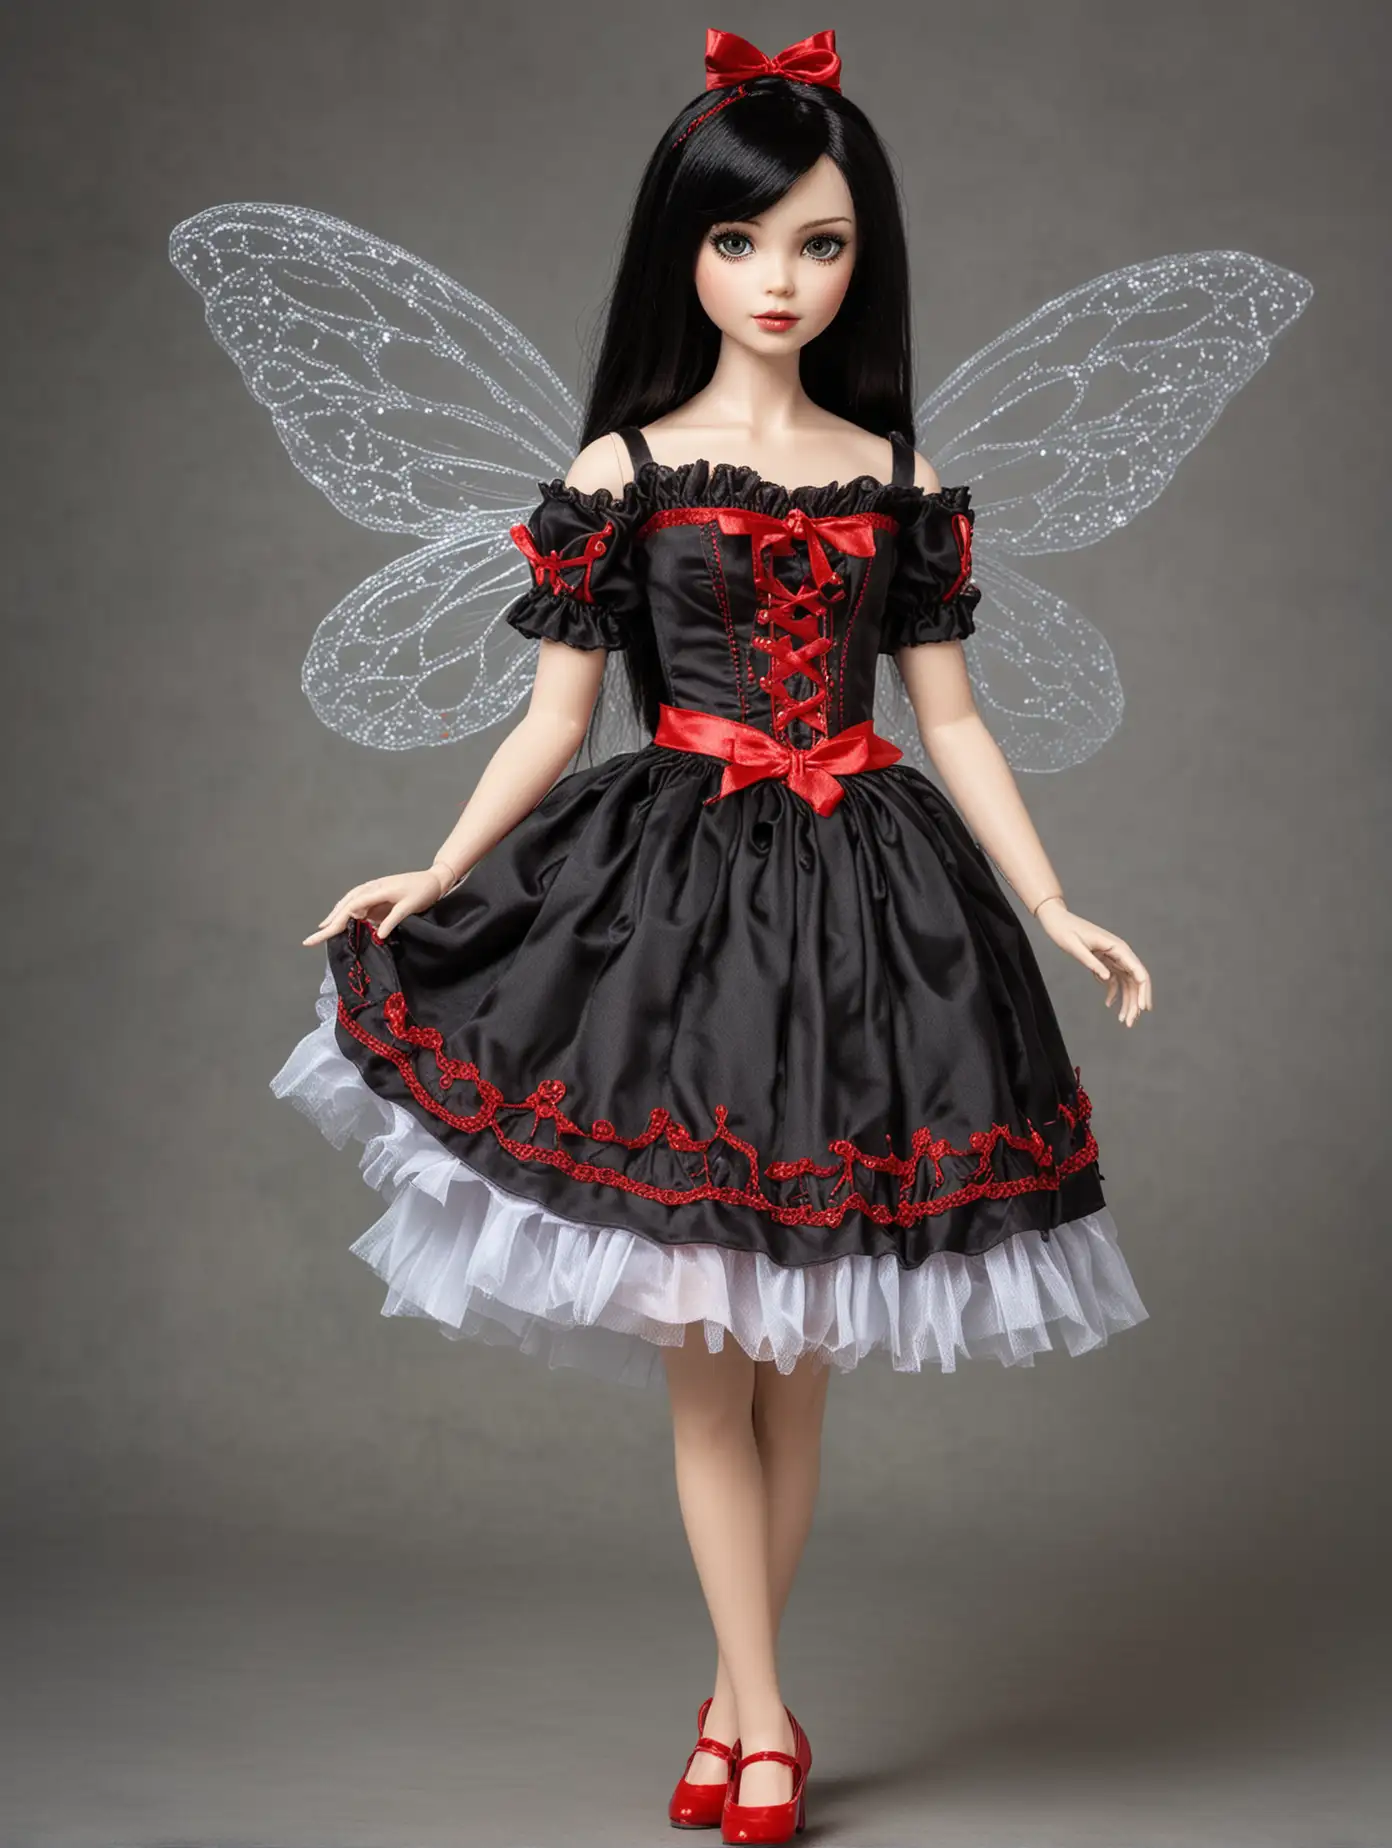 Beautiful female teenage doll, white skin, shoulder length black hair, wearing a Fairy costume, red shoes,